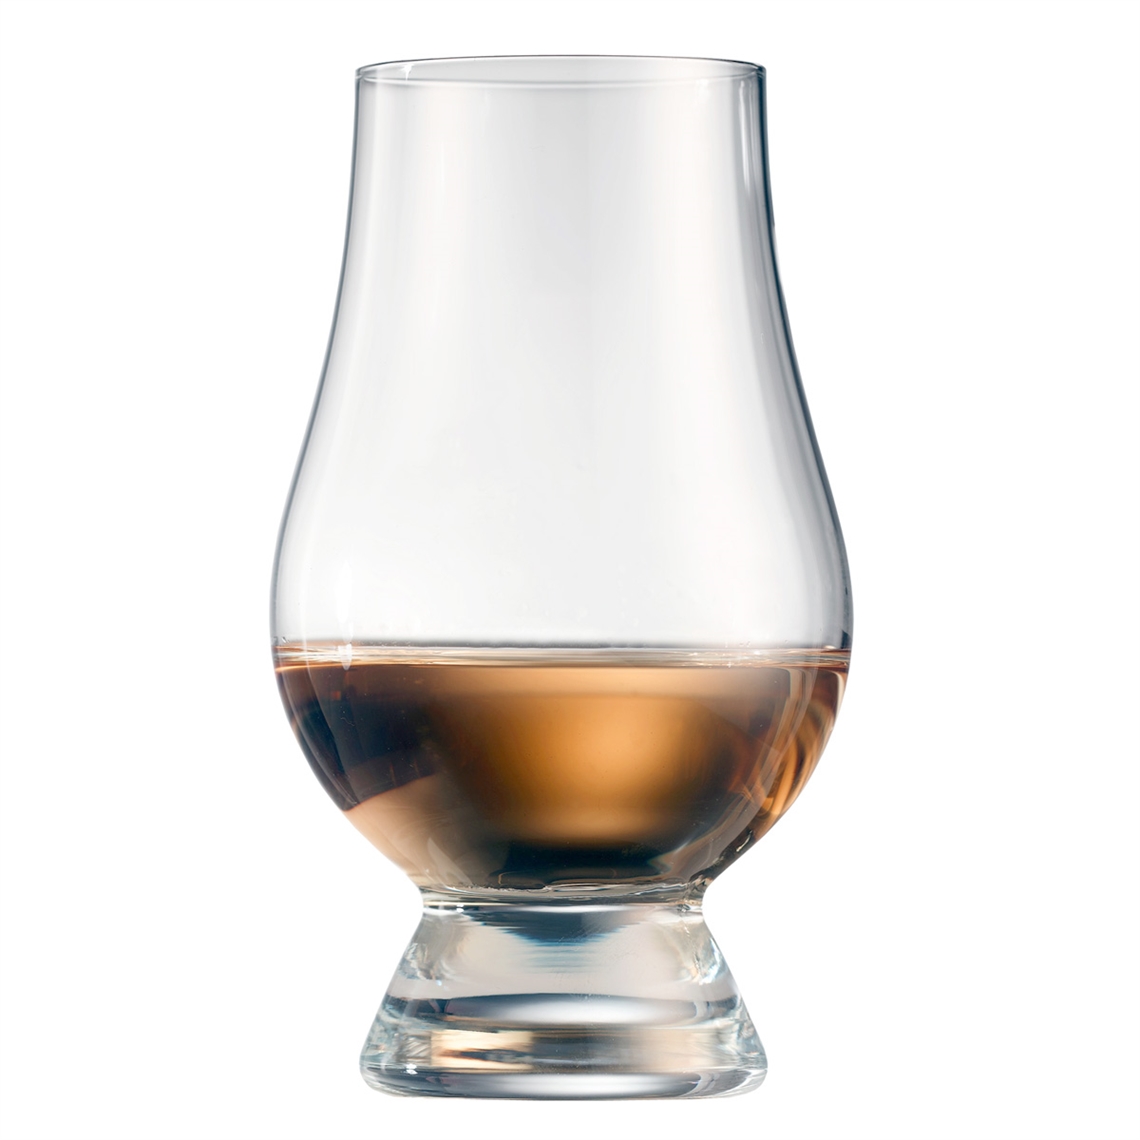 View more premium mouth blown glassware from our Whisky Glasses range